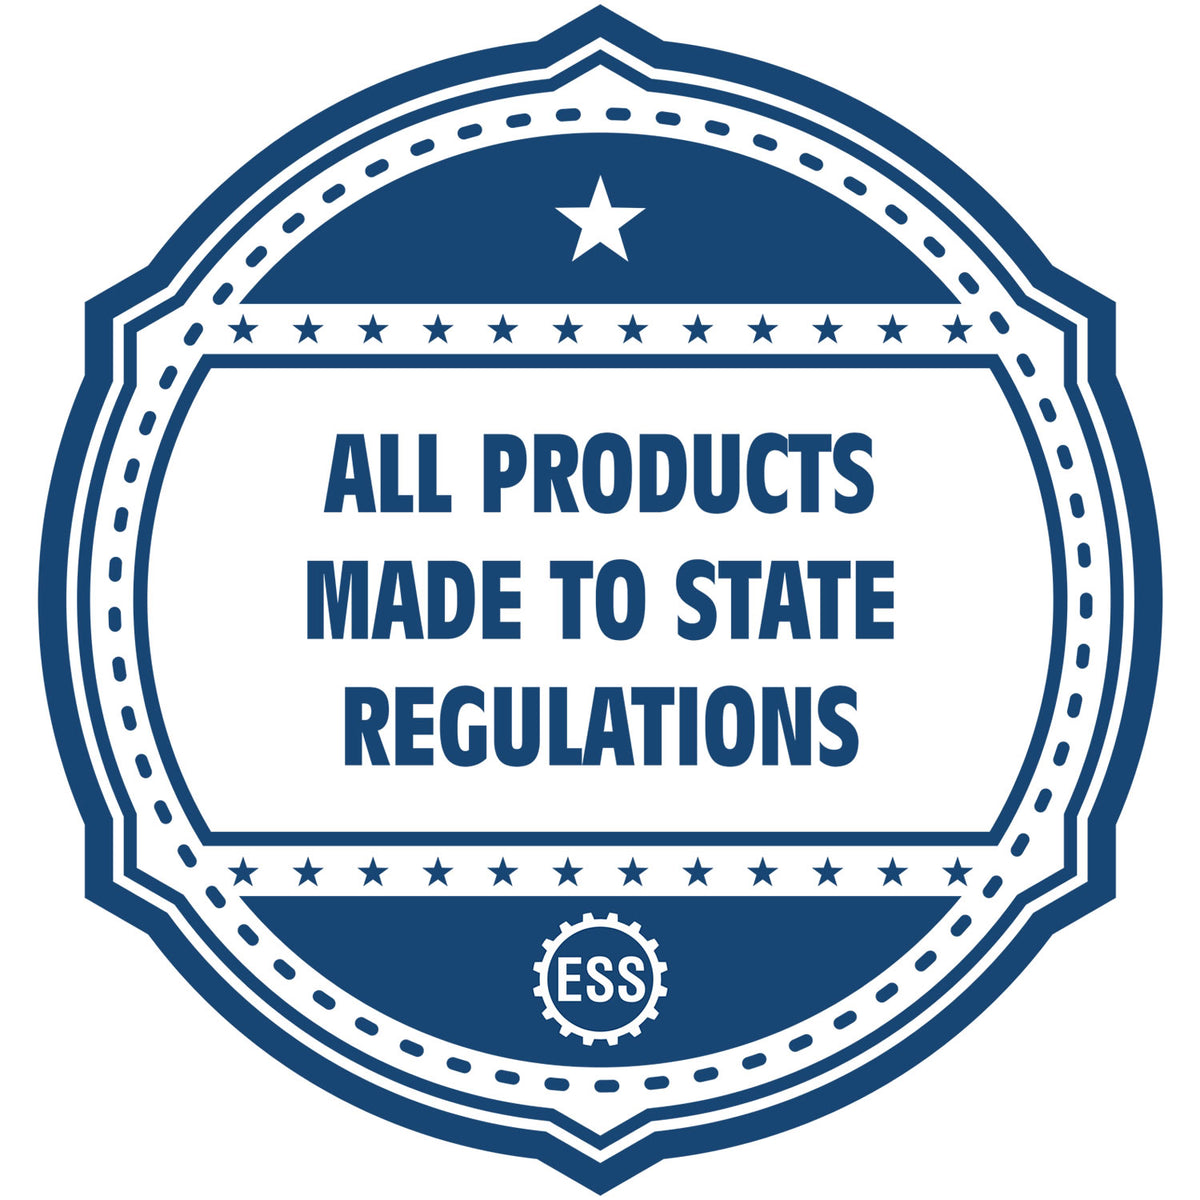 An icon or badge element for the Extended Long Reach New York Architect Seal Embosser showing that this product is made in compliance with state regulations.